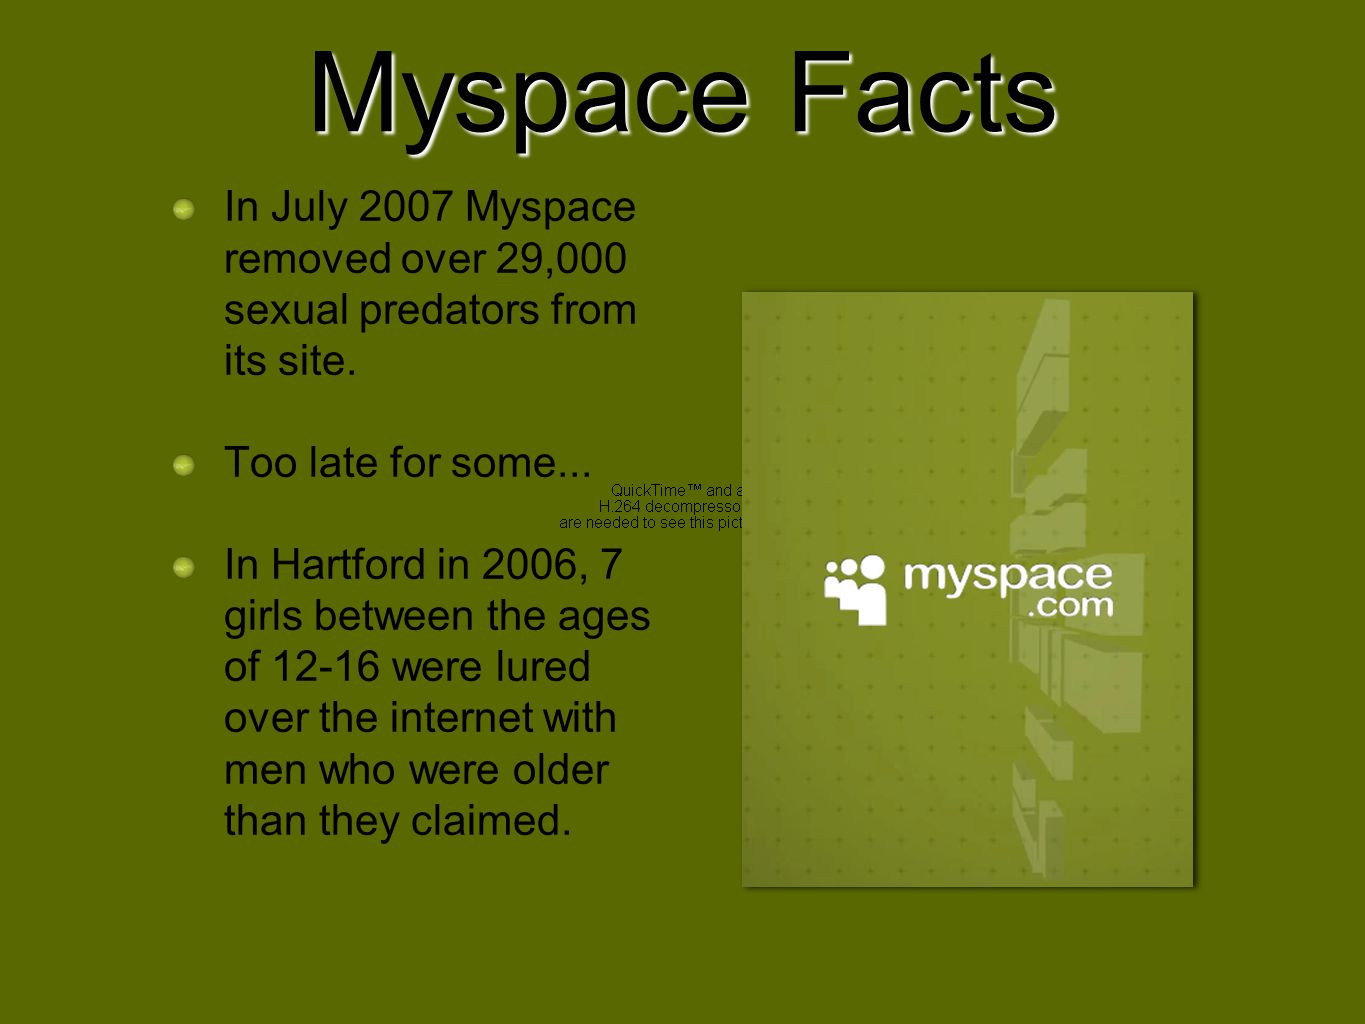 Myspace Facts In July 2007 Myspace removed over 29,000 sexual predators from its site. Too late for some...